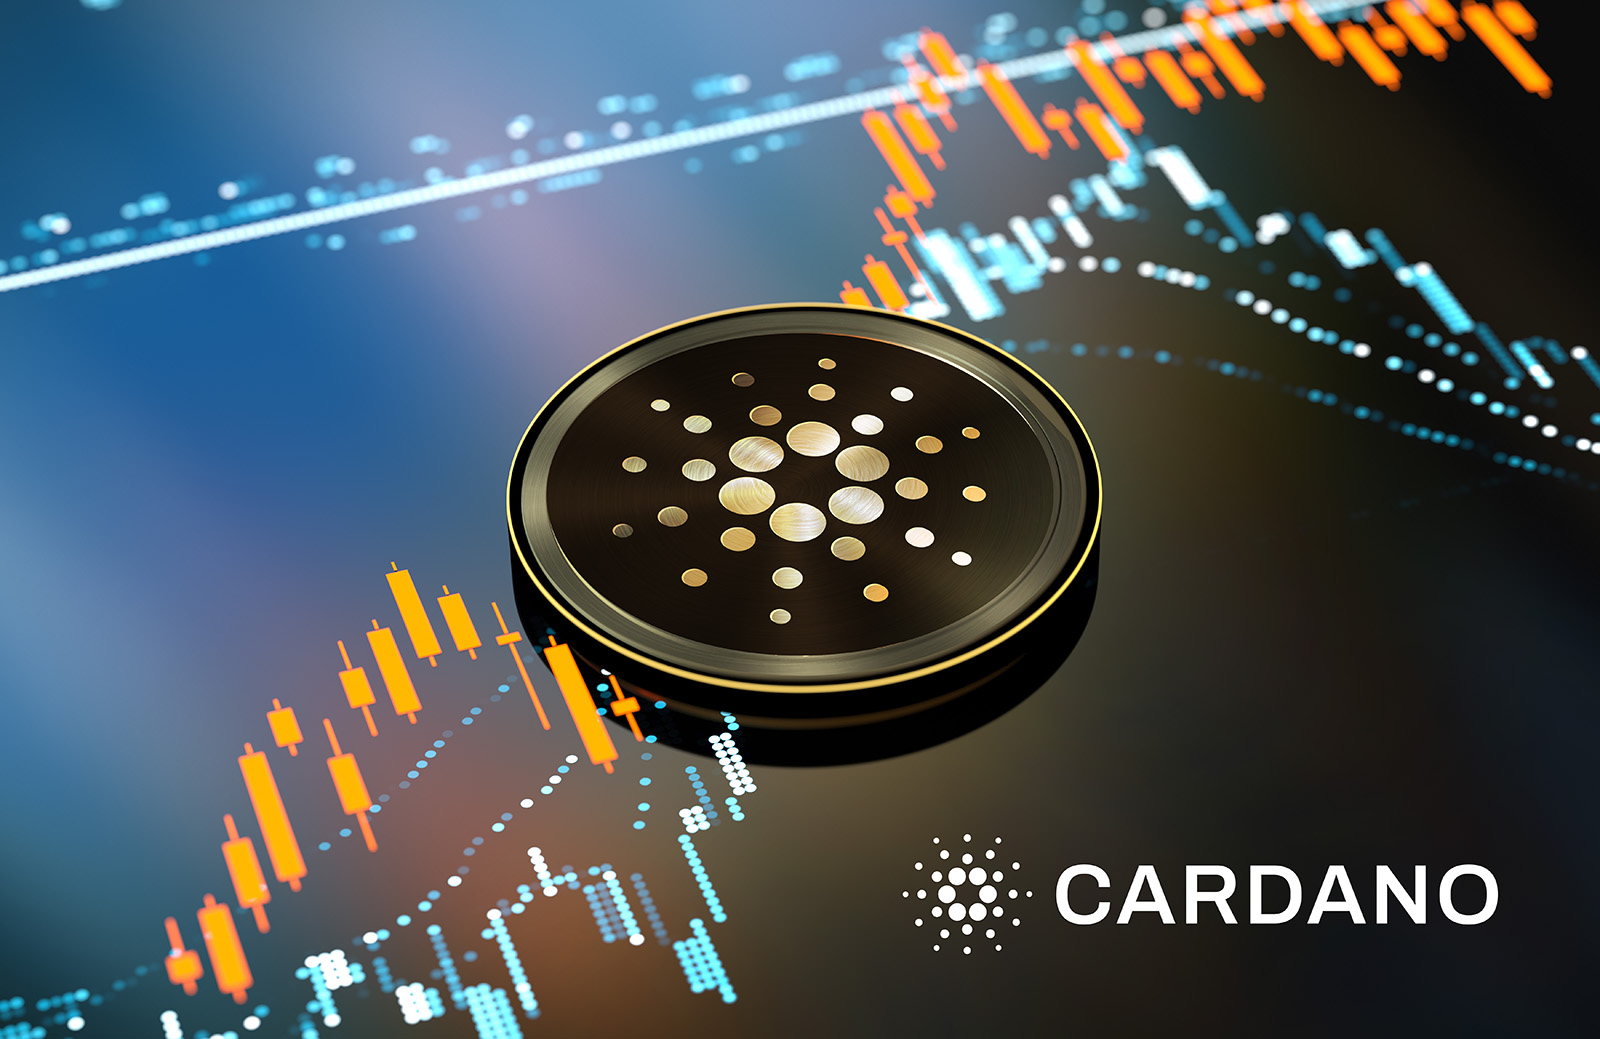 Why The Cardano Price Might Be On The Verge Of Another Decline